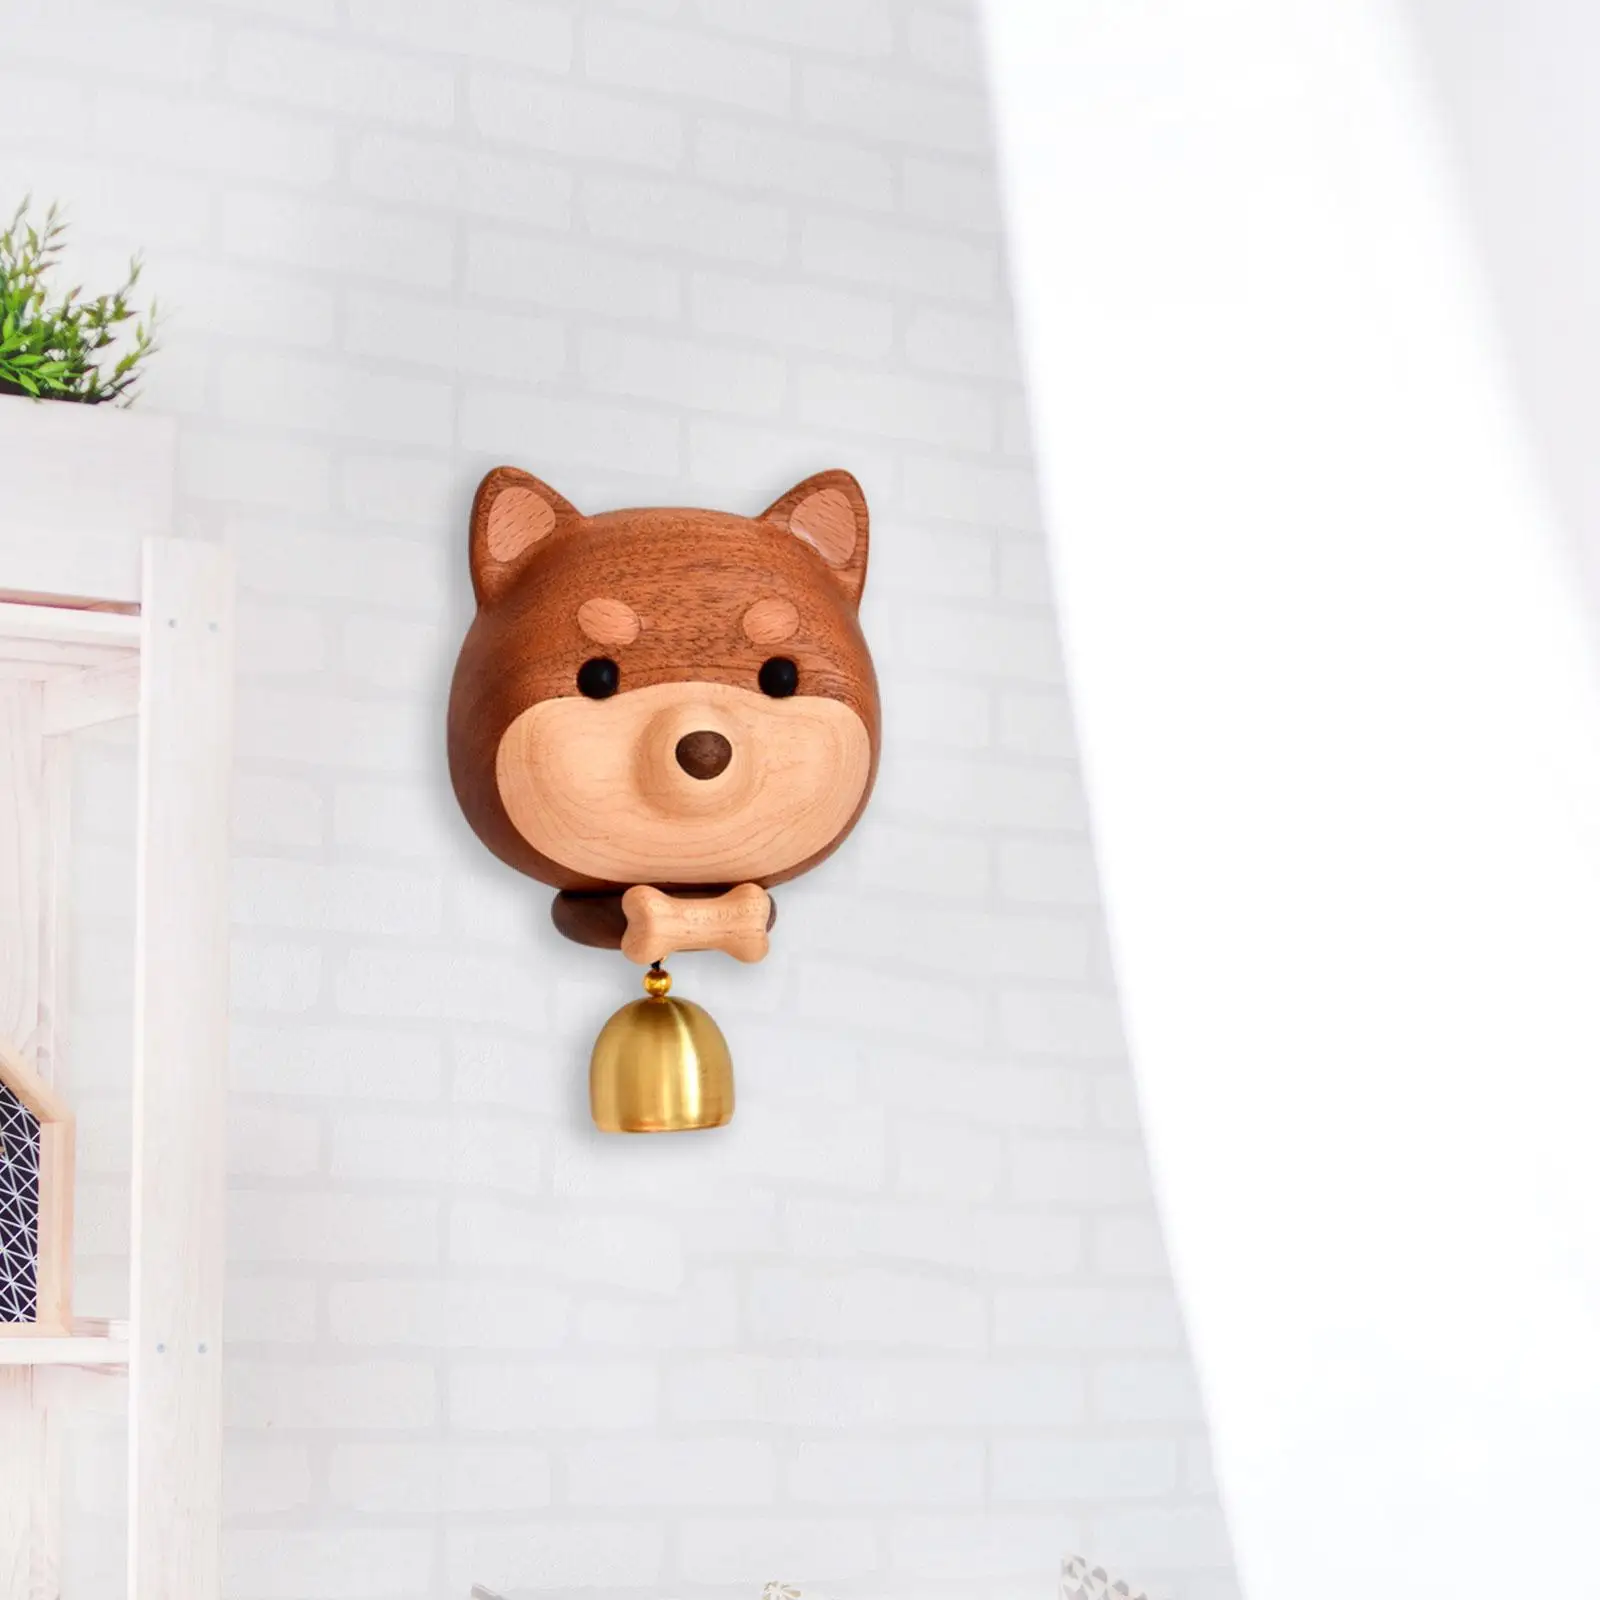 Shopkeepers Bell Hanging Bell Housewarming Gift Magnetic Attached Doorbell Gate Bell Chime Doorbell for Entrance Wardrobe Store